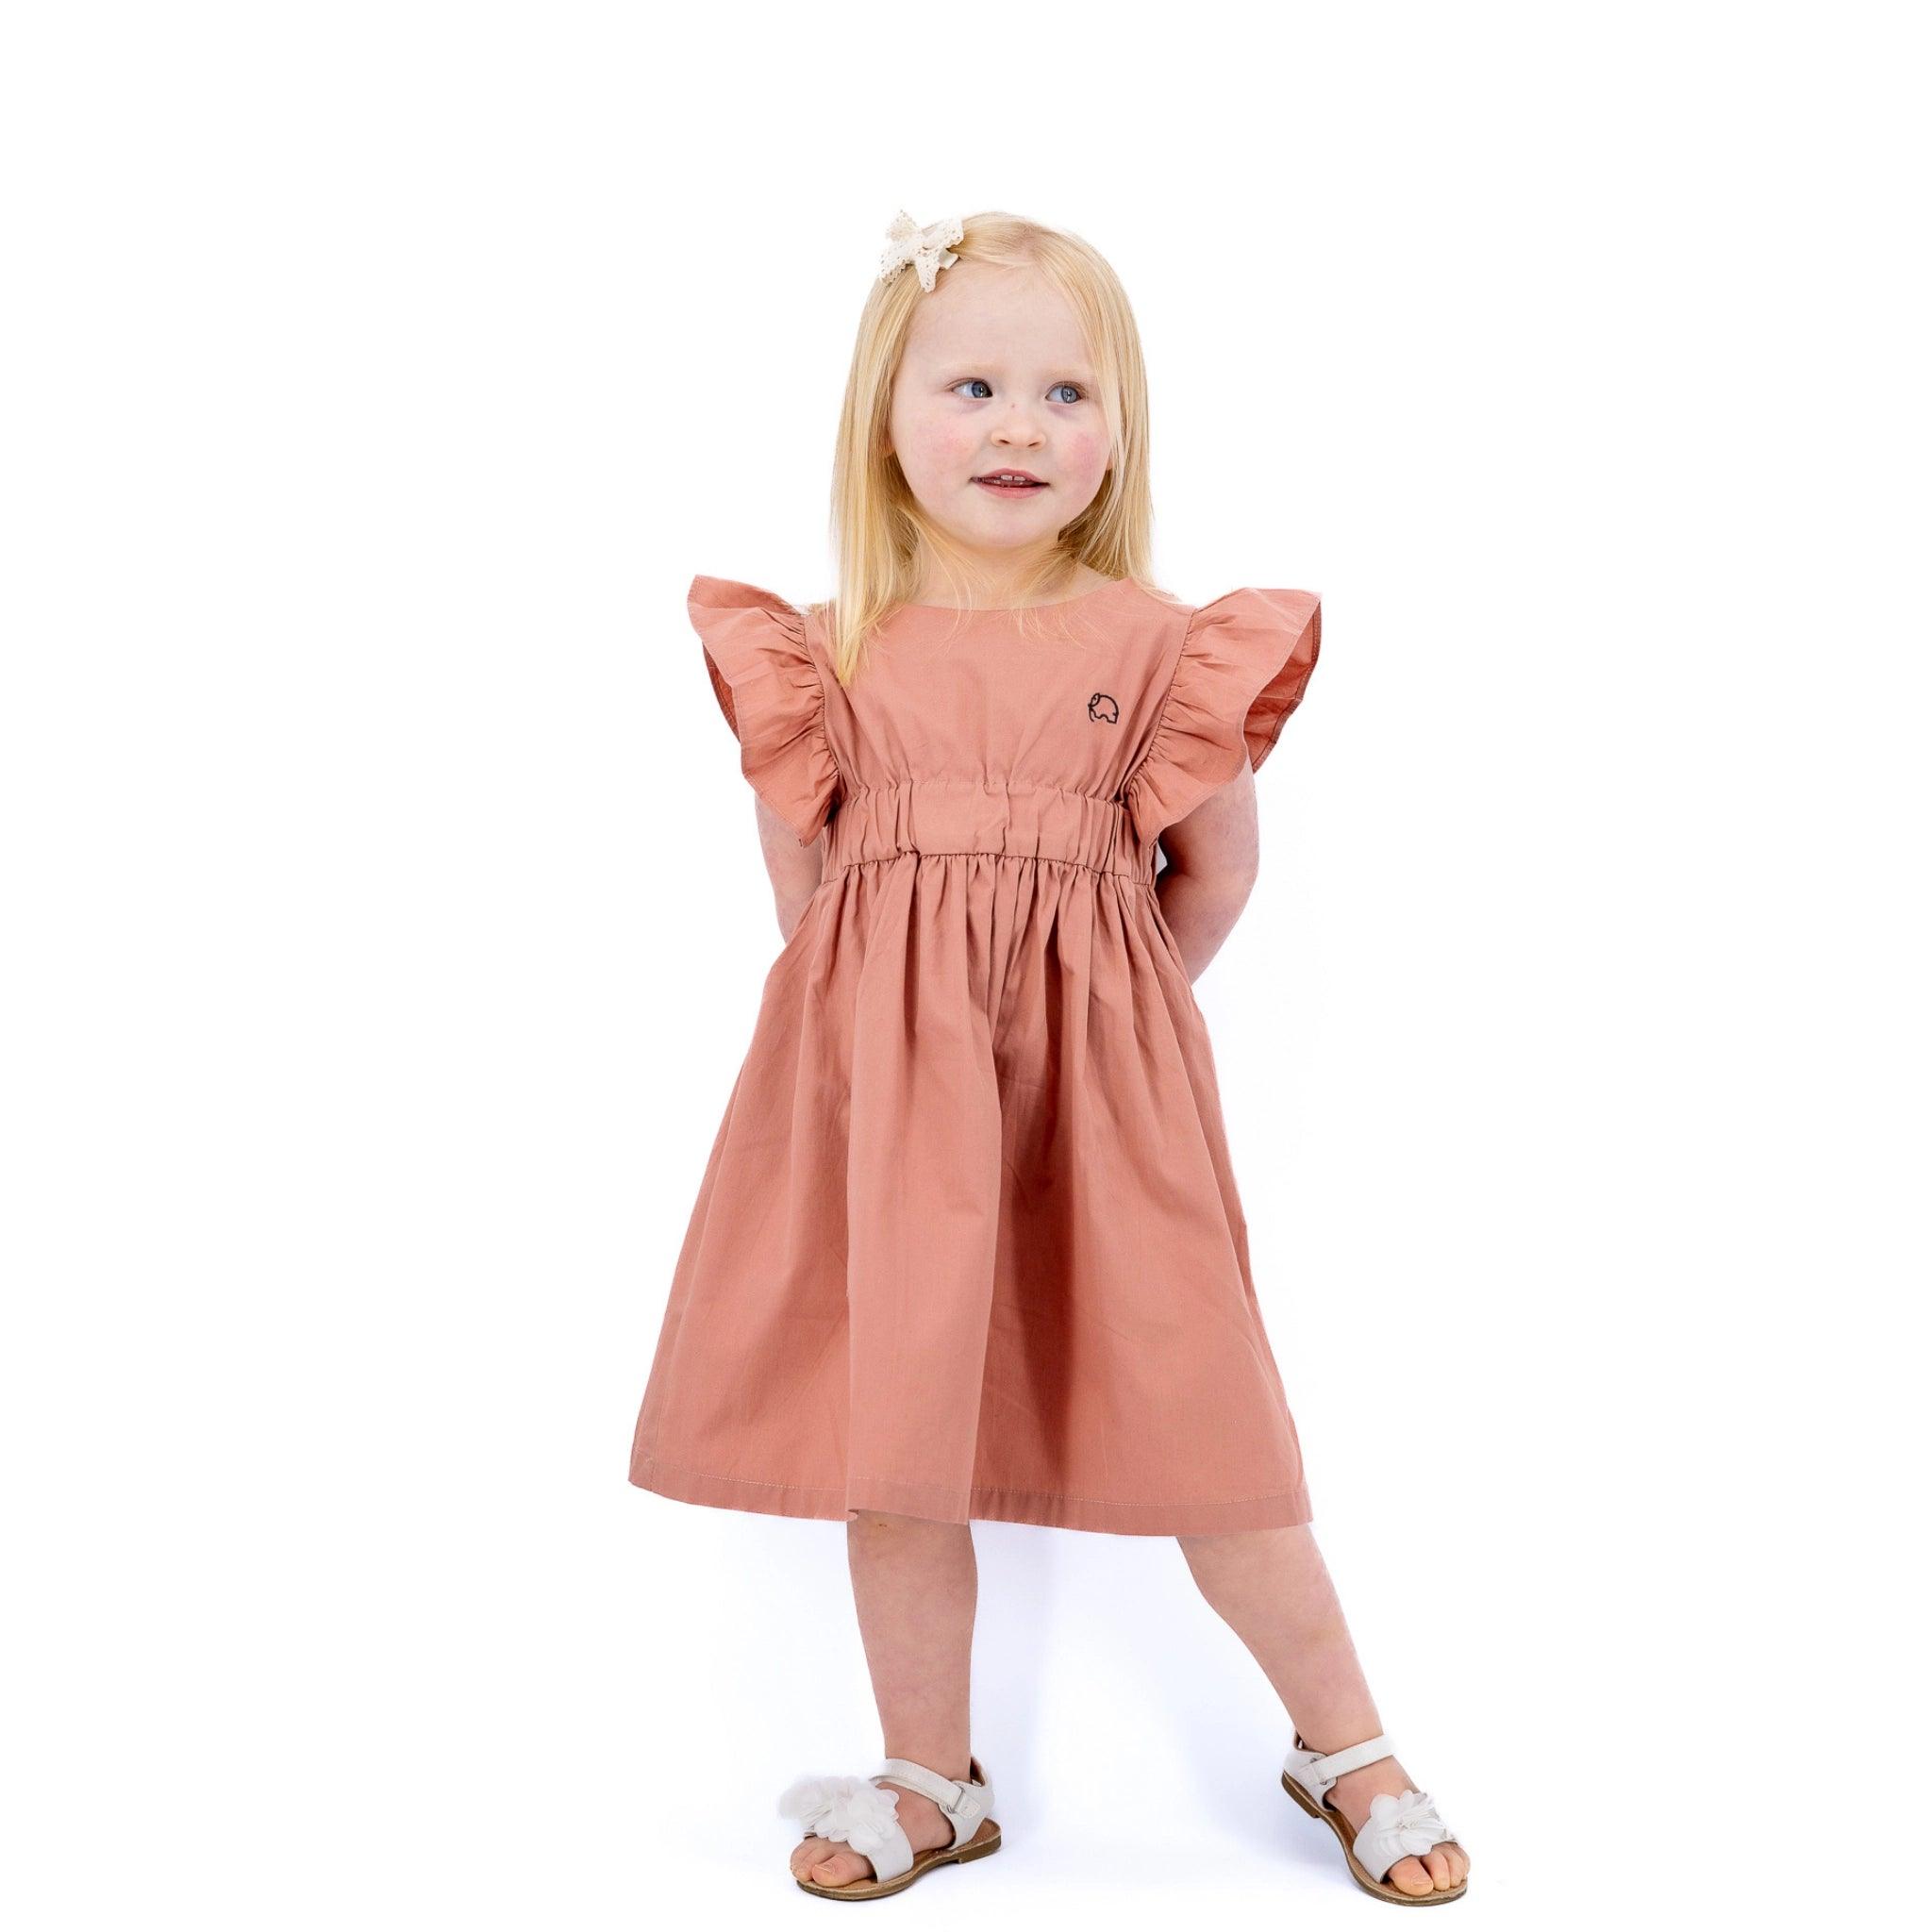 Young girl with blonde hair, wearing a Karee Brick Dust Cotton Floral Dress for Girls and white sandals, standing and smiling against a white background.